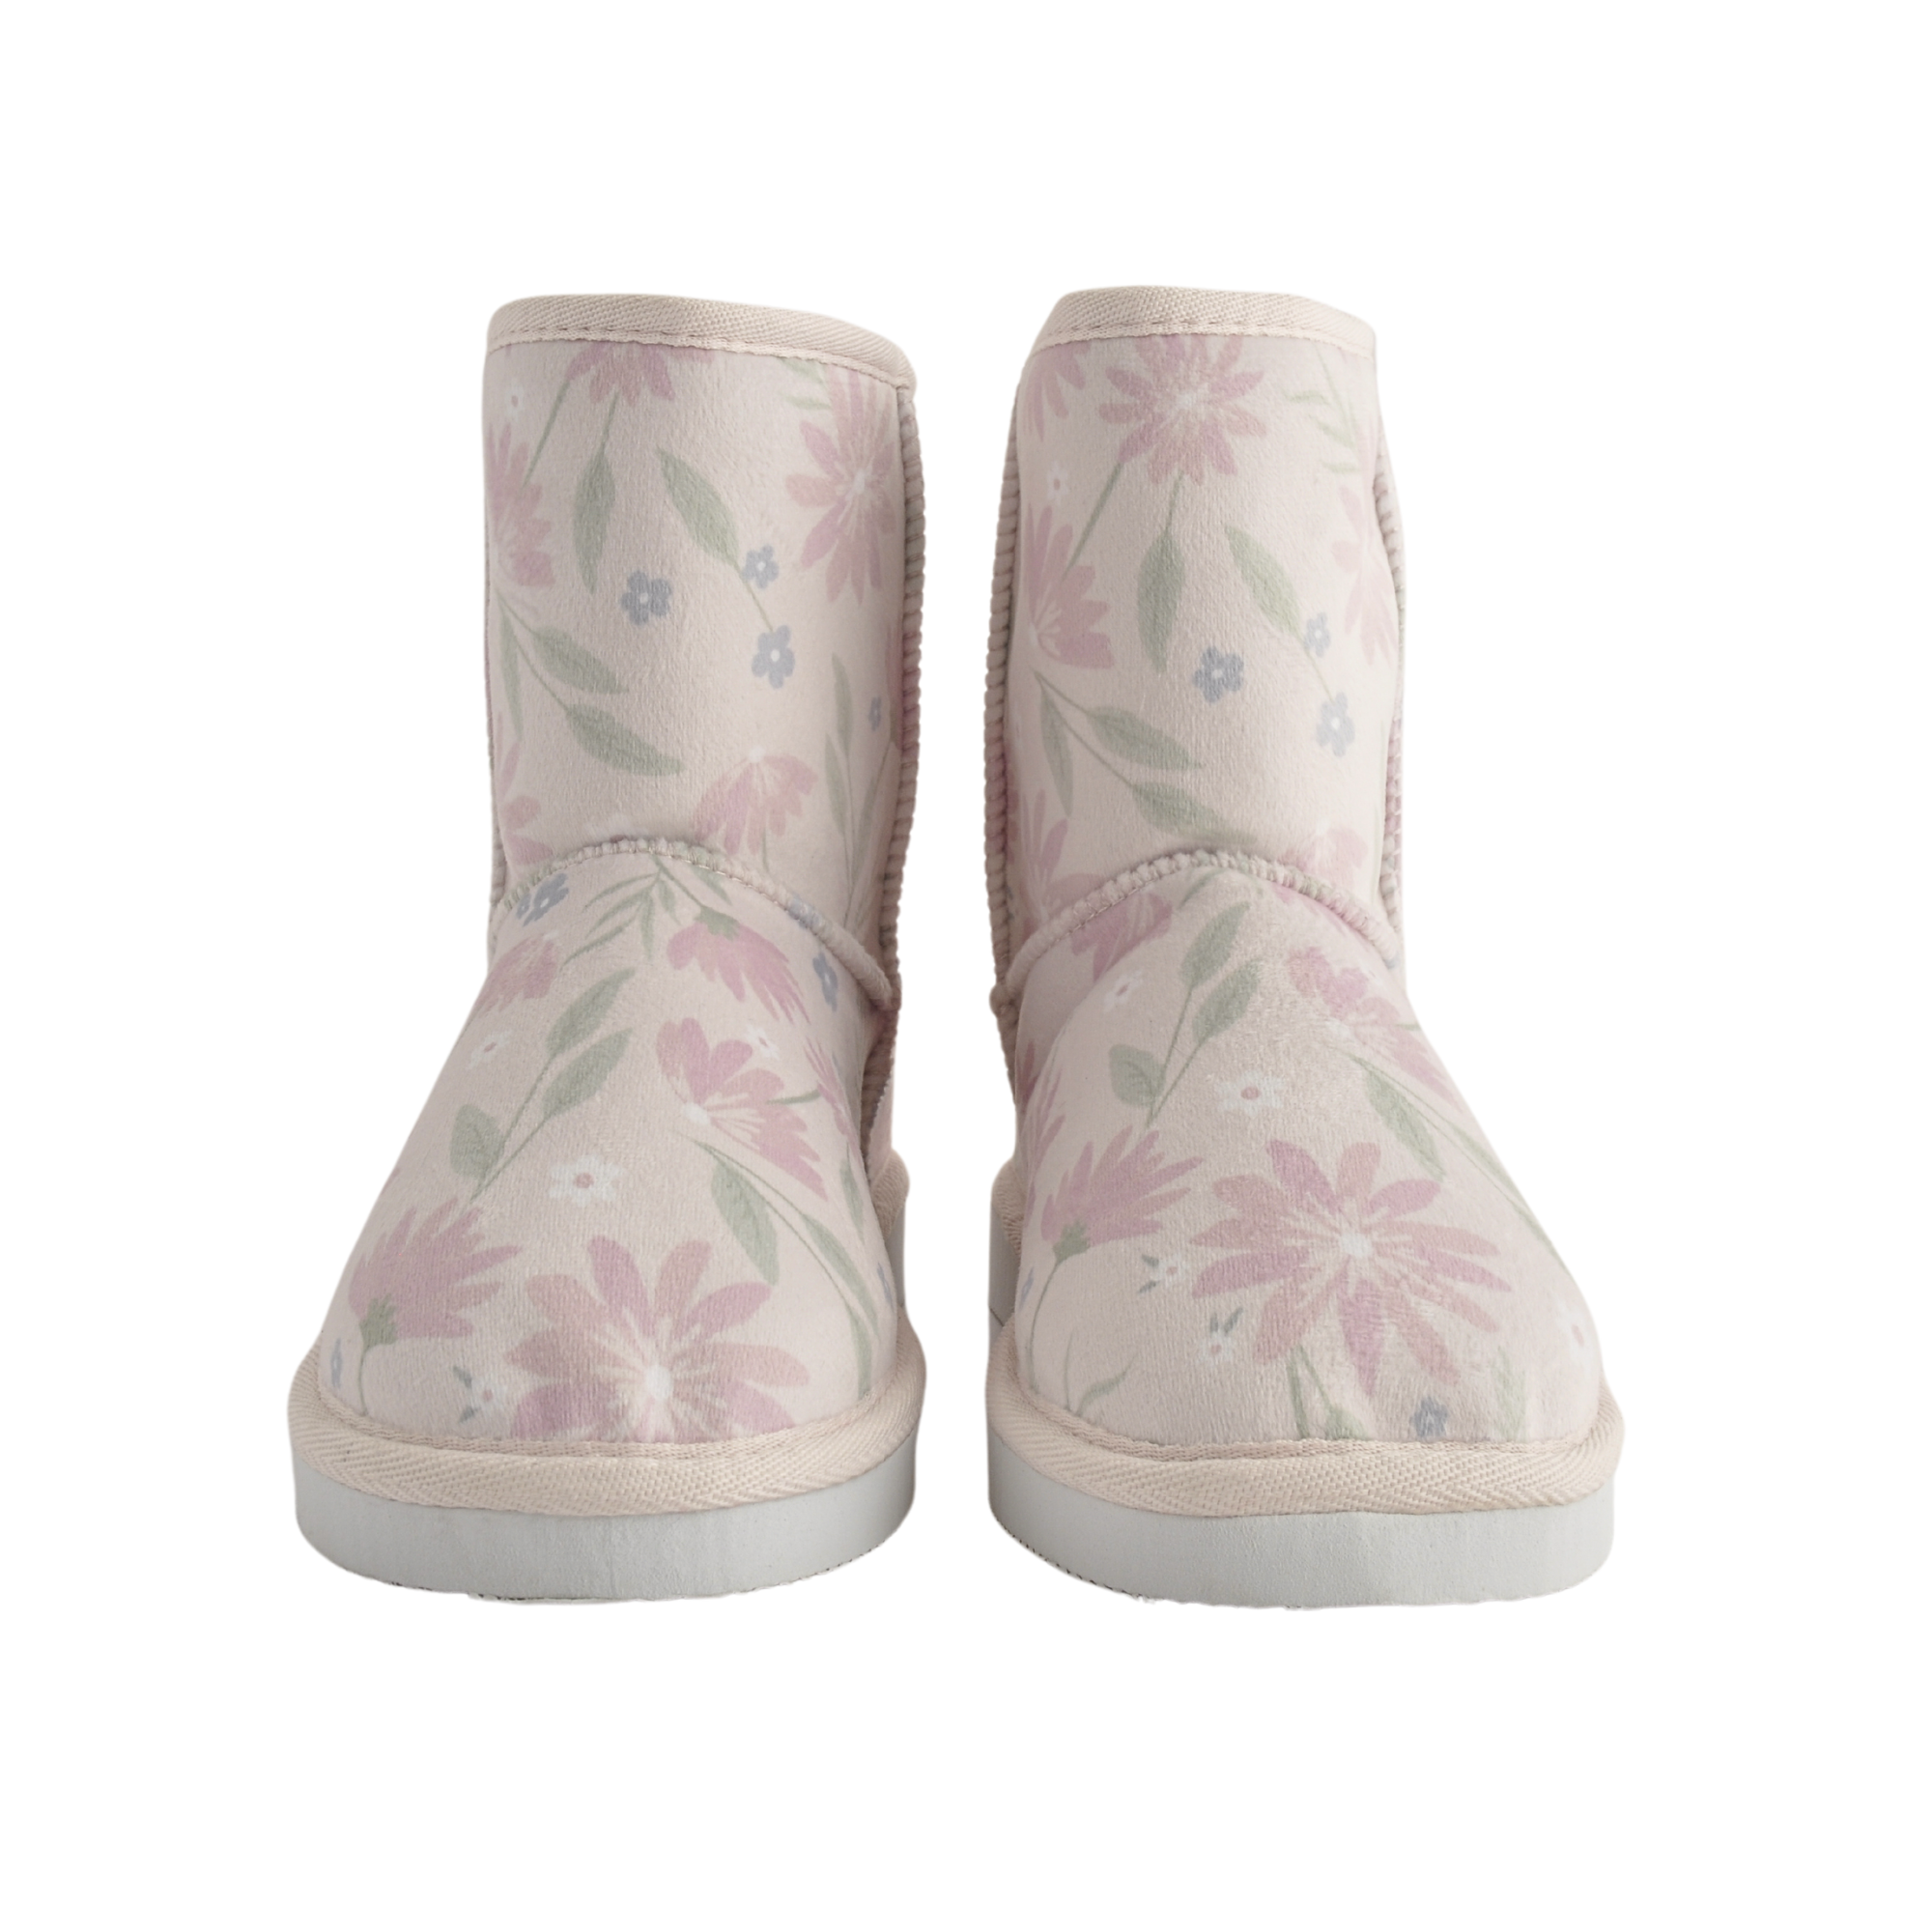 Printed Slipper Boots - Blushing Flora Size S